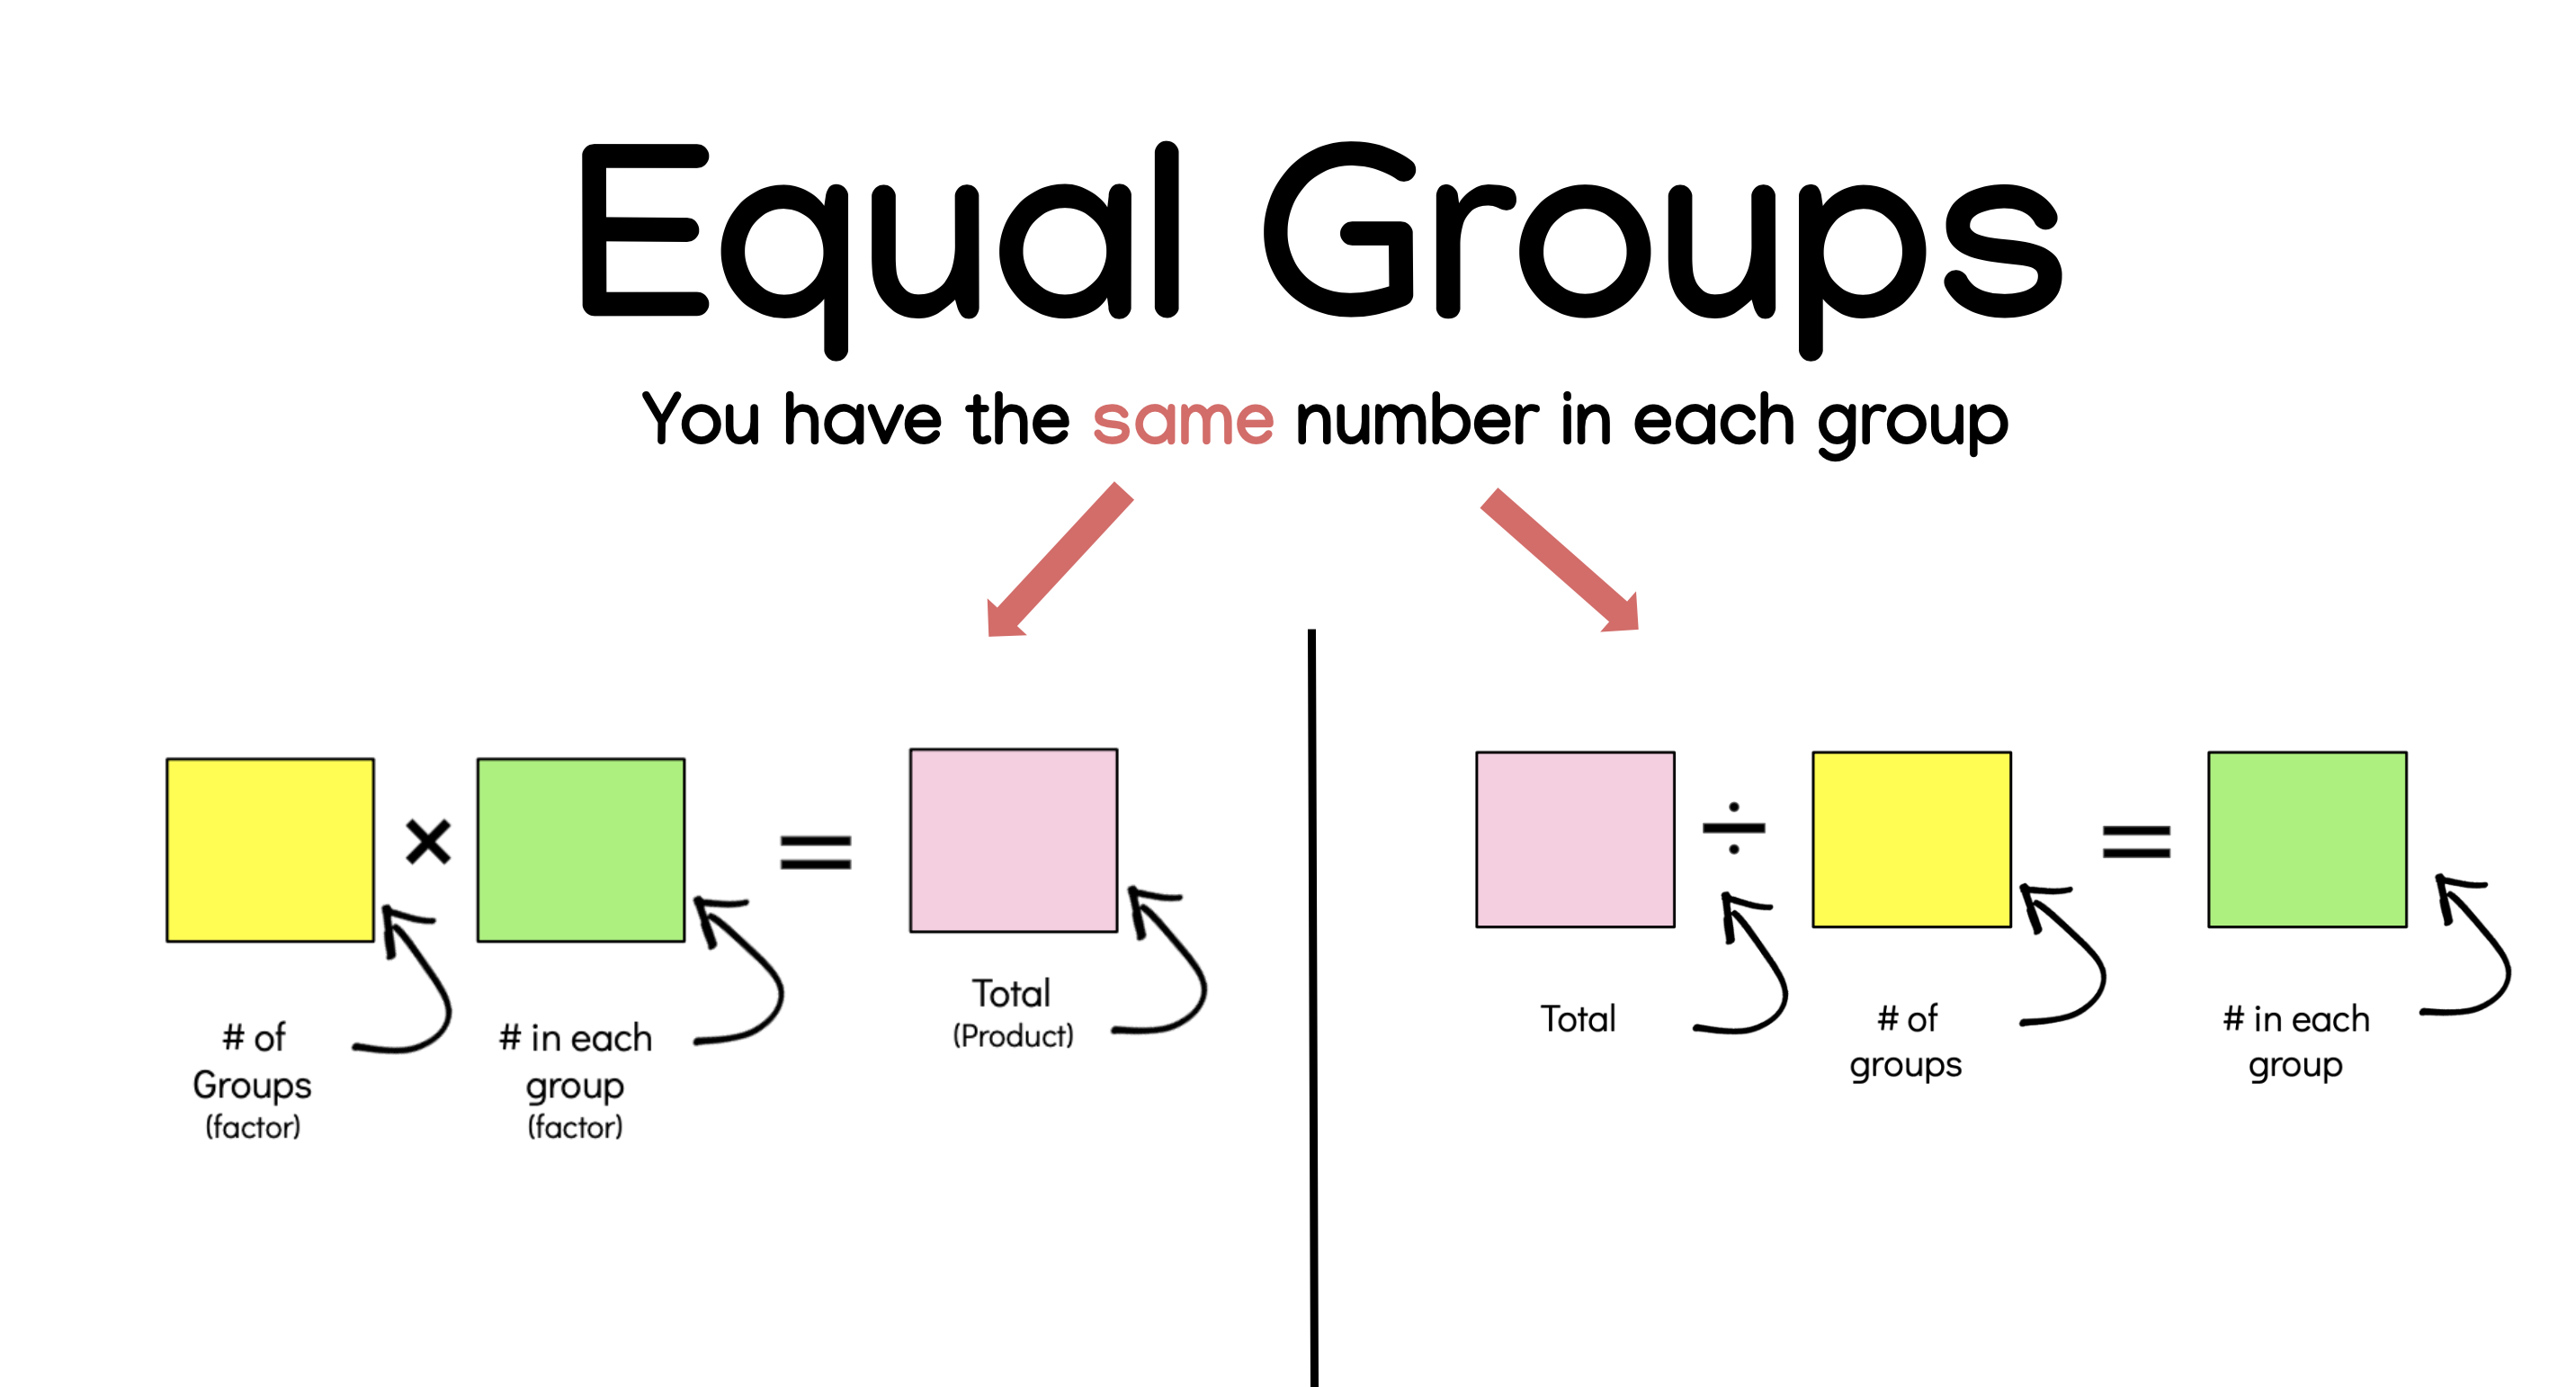 Multiplication as Equal Groups - Class 4 - Quizizz